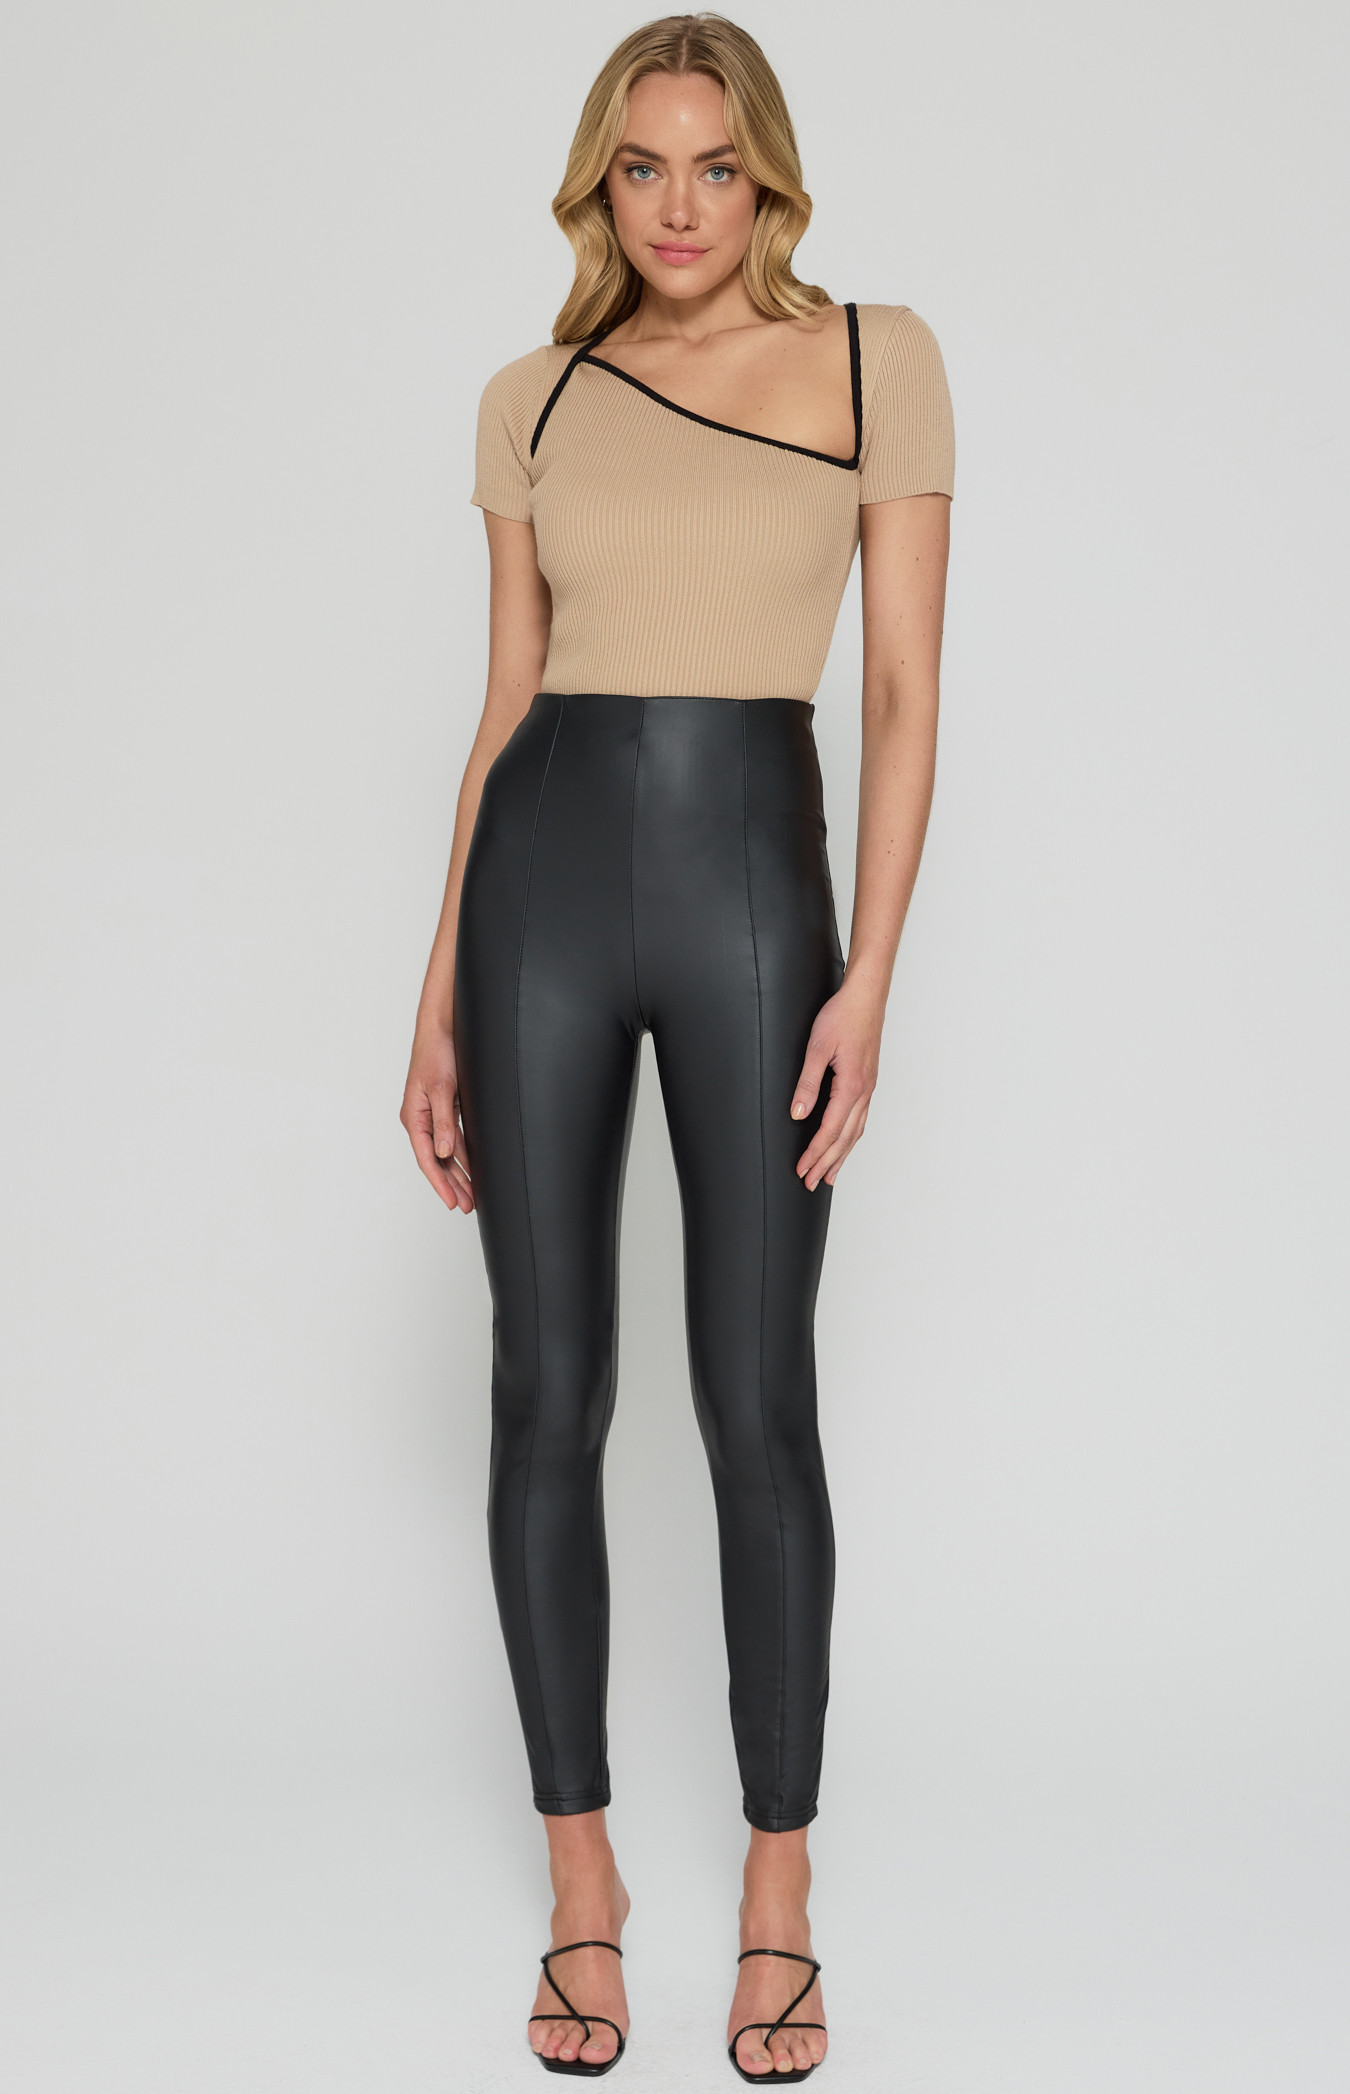 7 Faux-Leather Leggings That Rival Spanx — And Are Half the Price